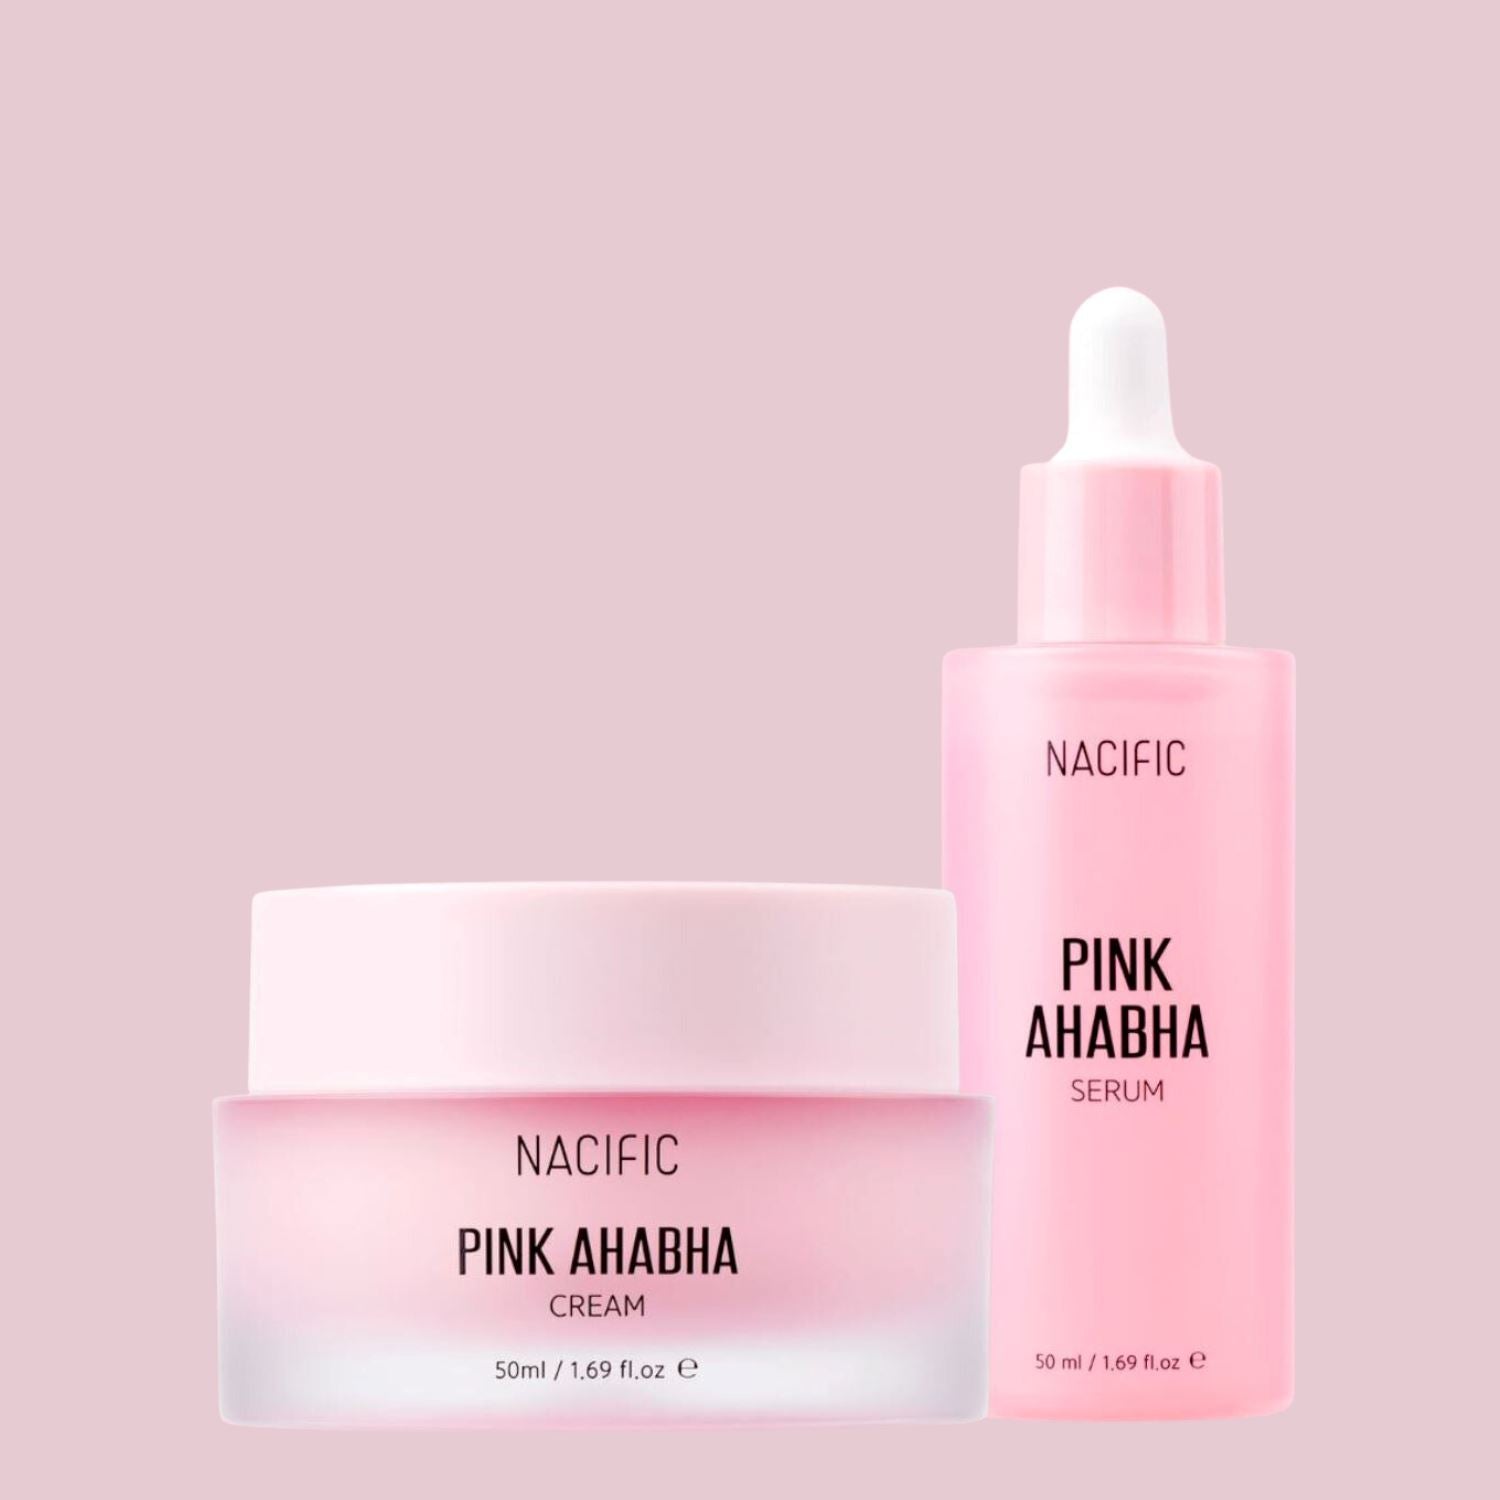 Nacific Pink AHA BHA Exfoliate And Brighten Set, at Orion Beauty. Nacific Official Sole Authorized Retailer in Sri Lanka!